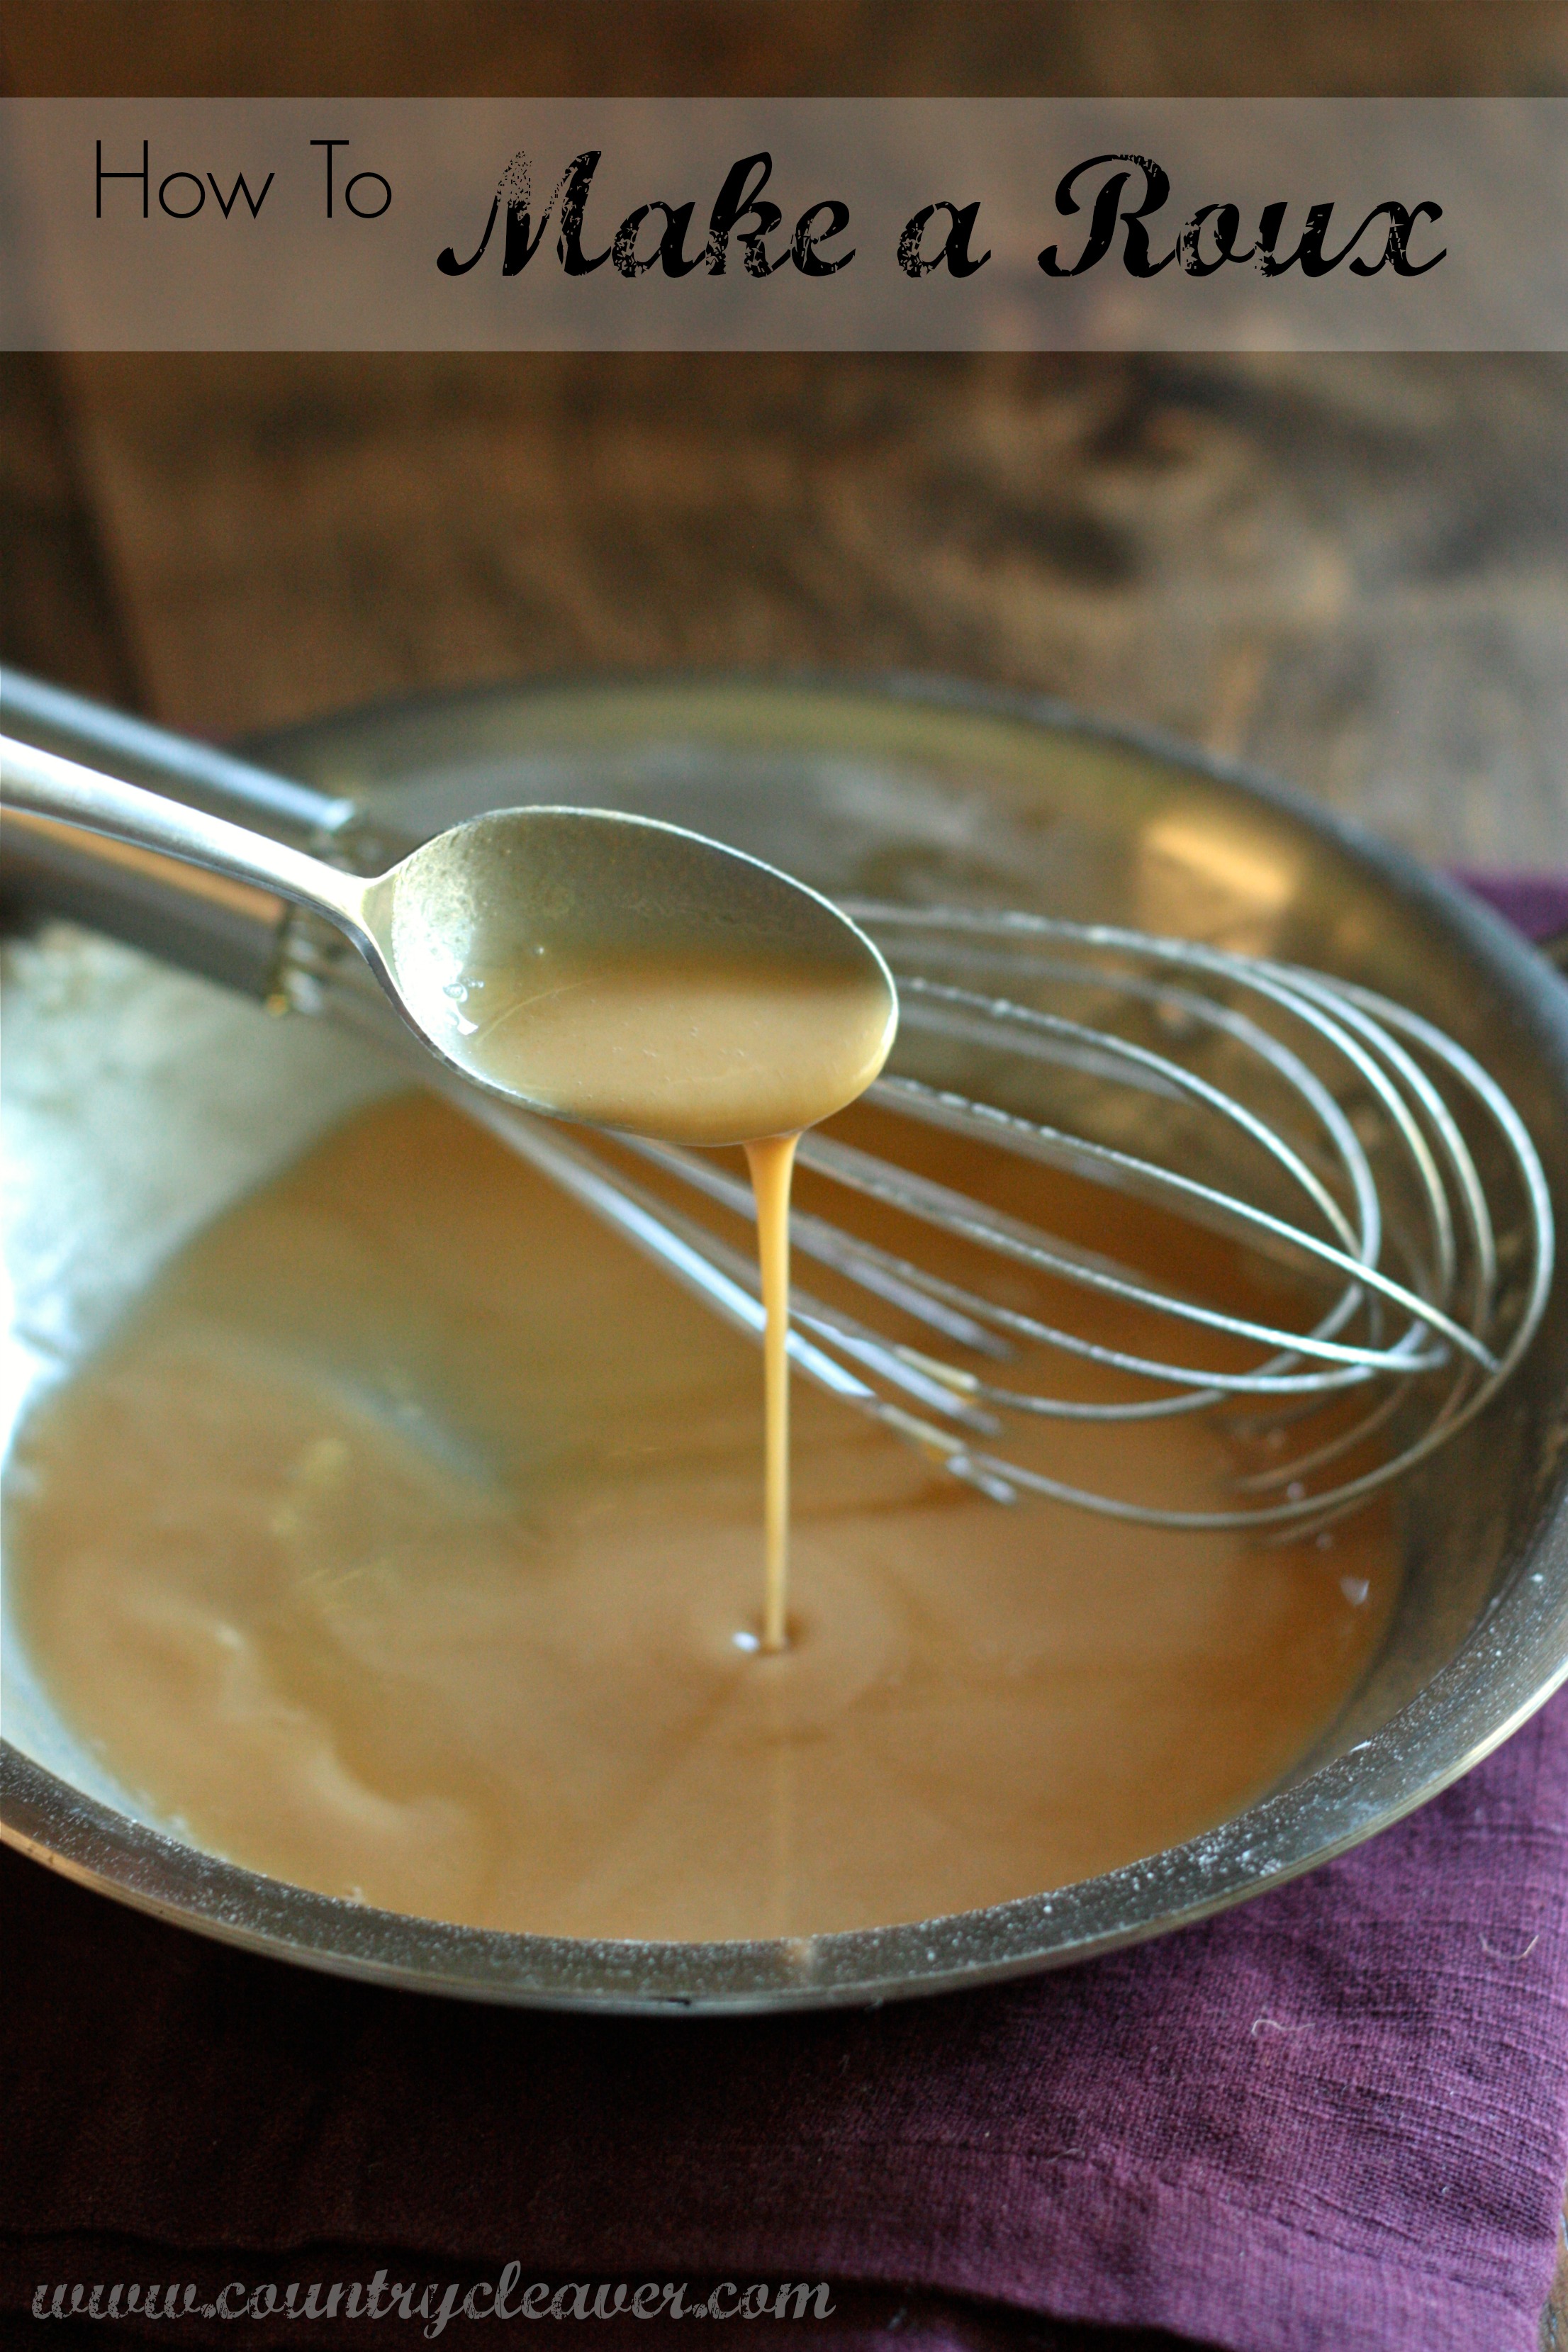 How to Make Roux - www.countrycleaver.com